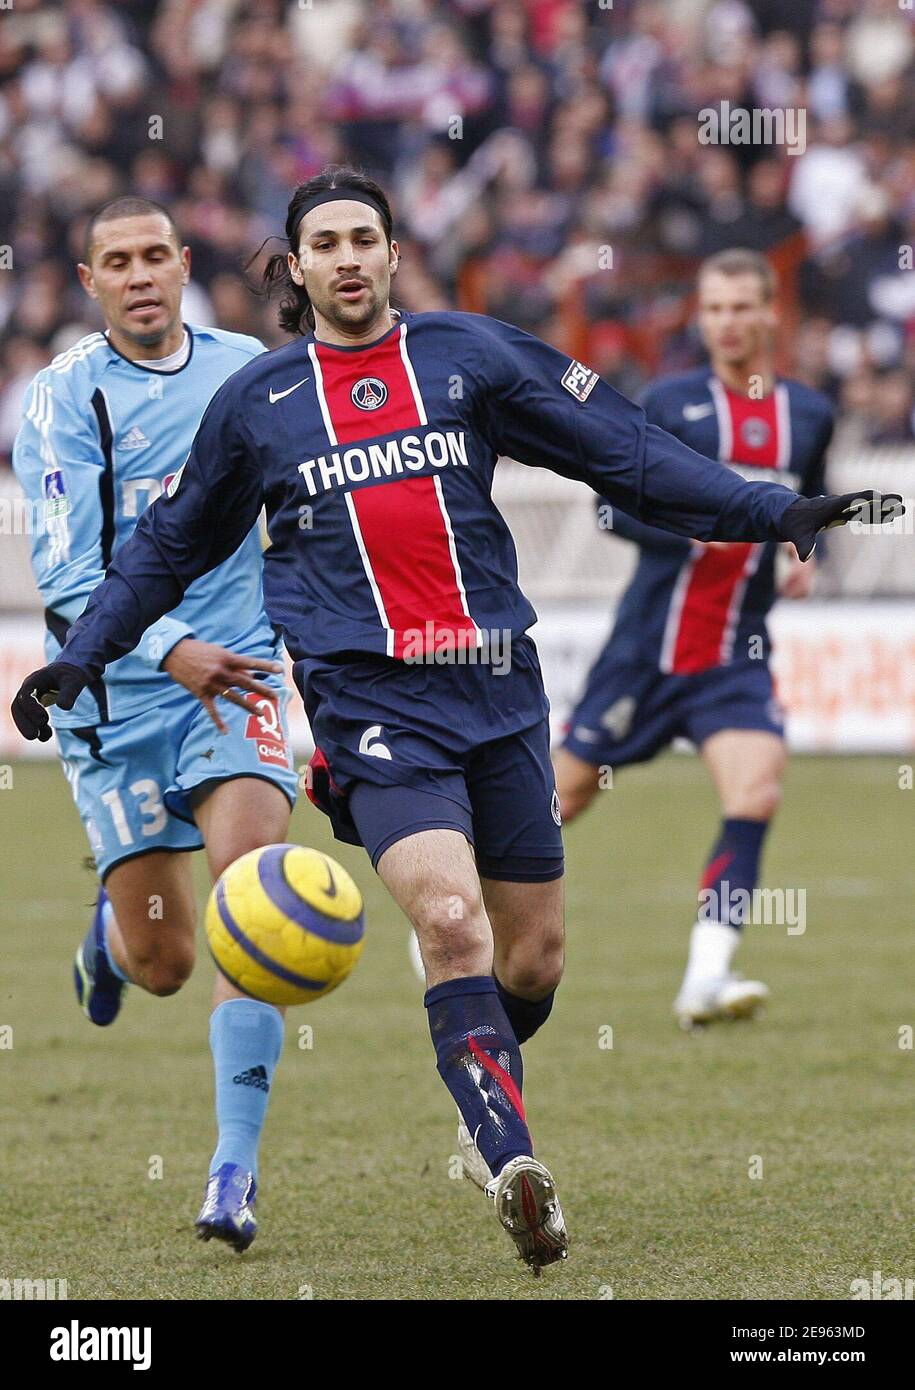 PSG's Mario Yepes during the French first league football match Paris Saint-Germain vs Olympique de Marseille at the Parc des Princes in Paris, France, on March 5, 2006. The game ended in a draw 0-0. Photo by Mehdi Taamallah/Cameleon/ABACAPRESS.COM Stock Photo